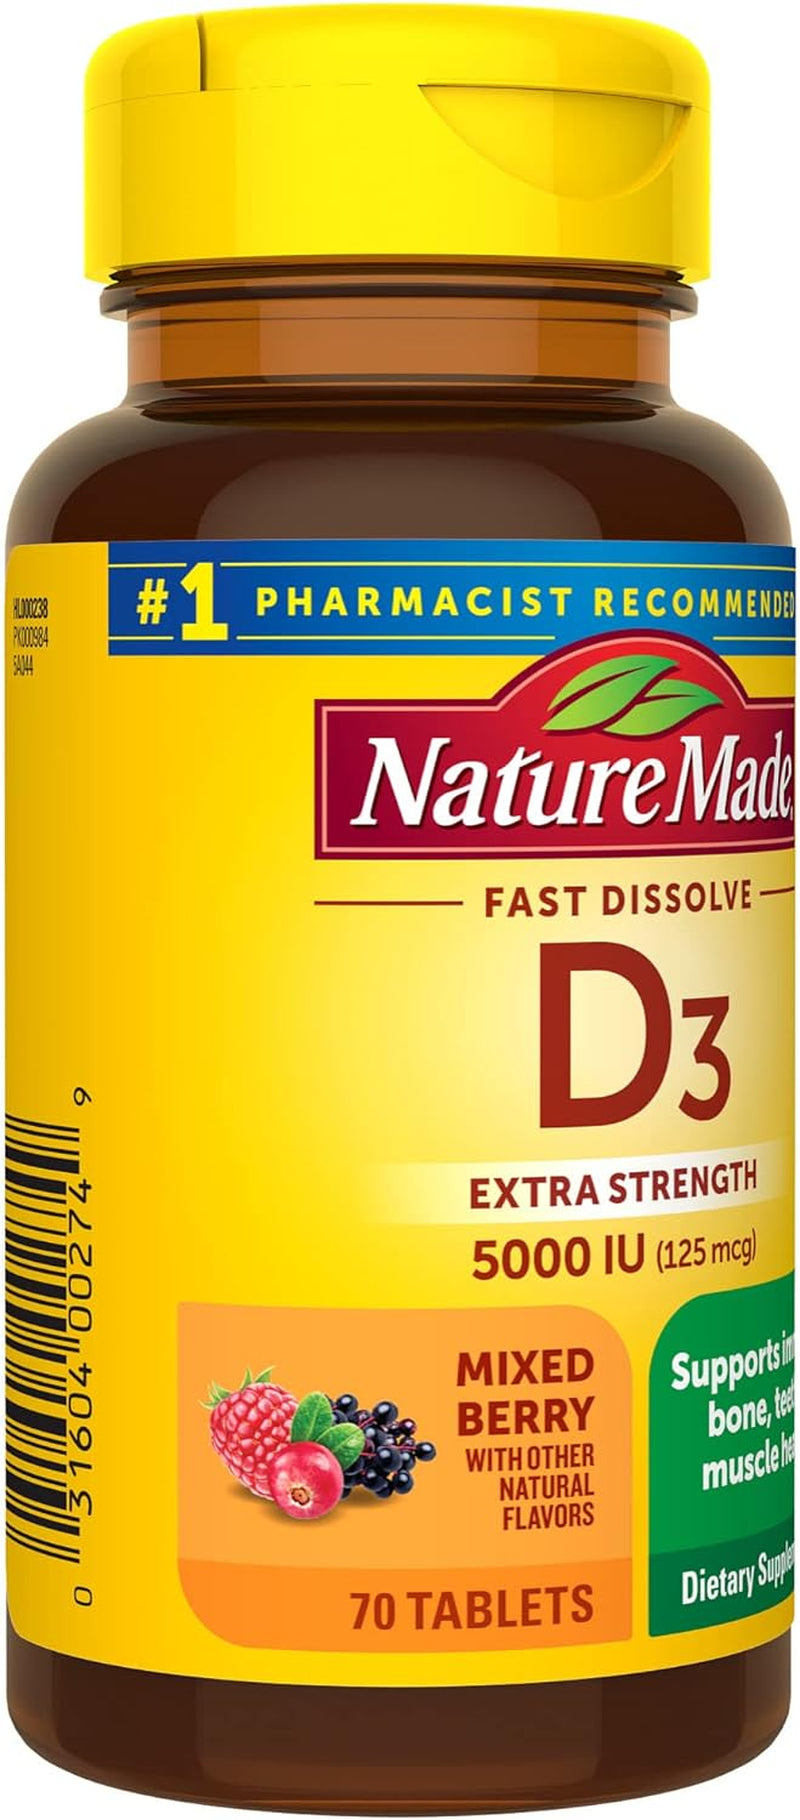 Extra Strength Vitamin D3 5000 IU (125 Mcg), Vitamin D Supplement for Bone, Teeth, Muscle, Immune Health Support, 70 Sugar Free Fast Dissolve Tablets, 70 Day Supply